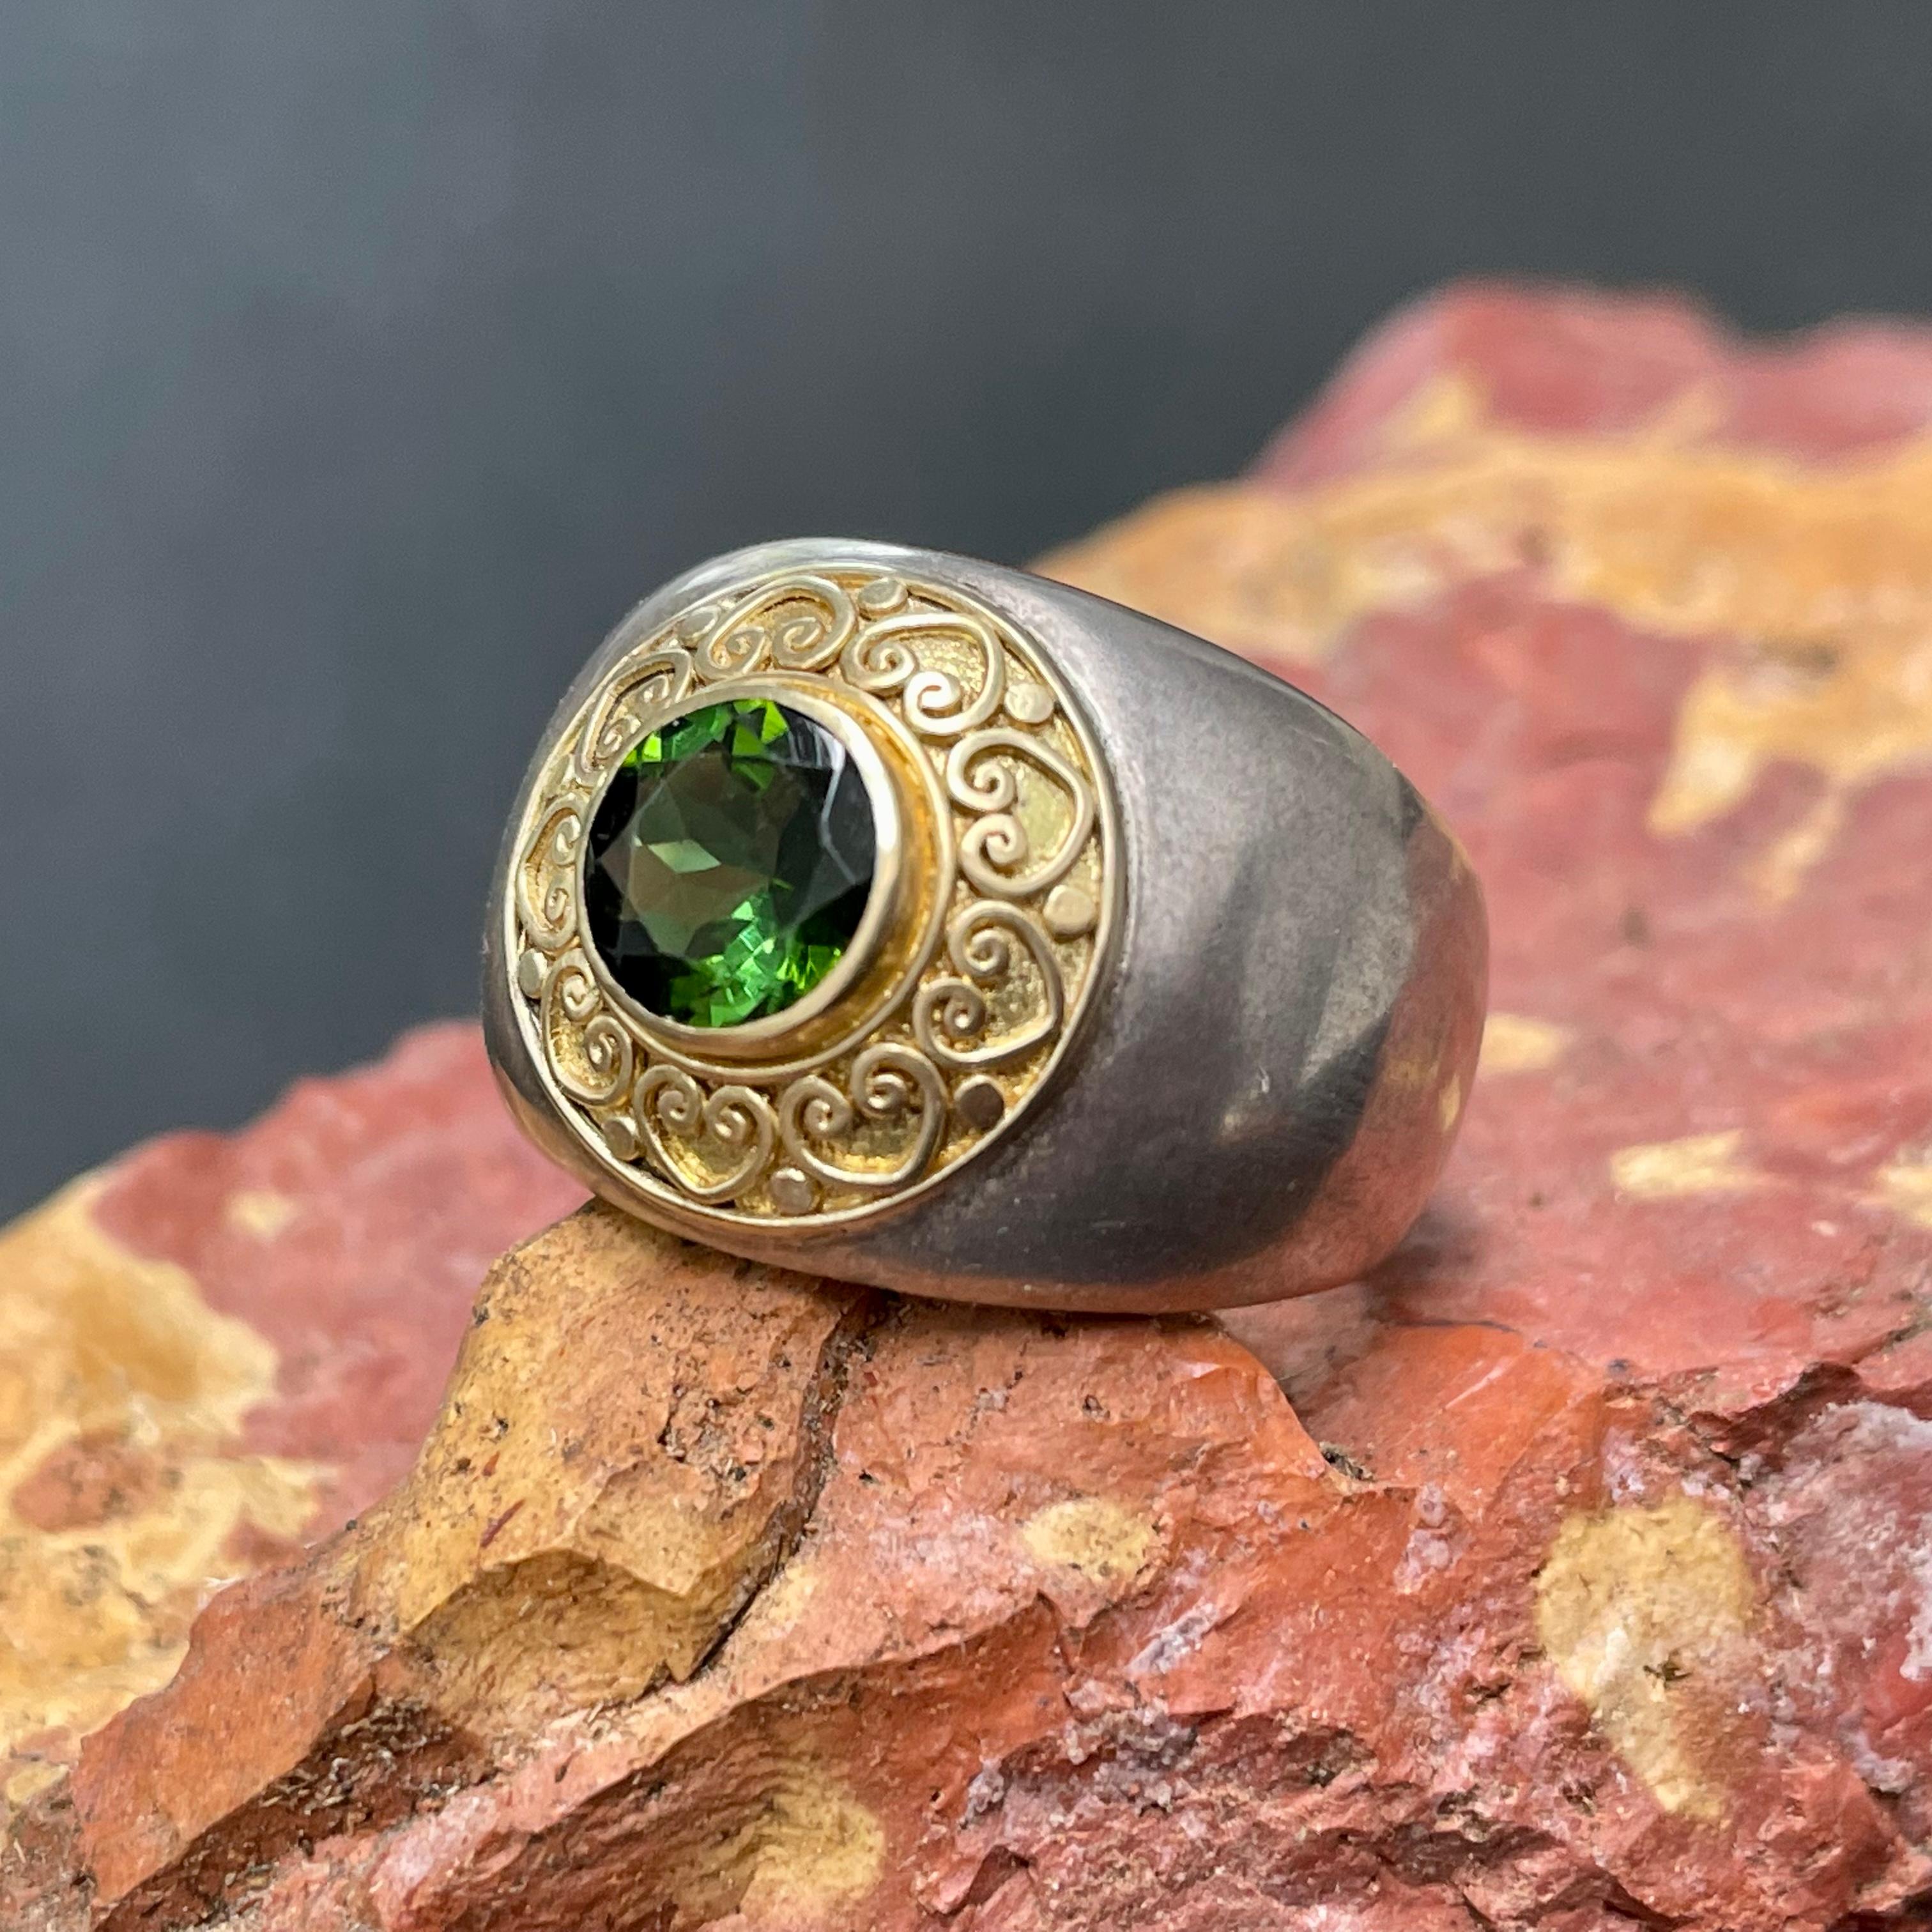 A brilliant round 8 mm faceted green tourmaline is surrounded by intricate handmade 